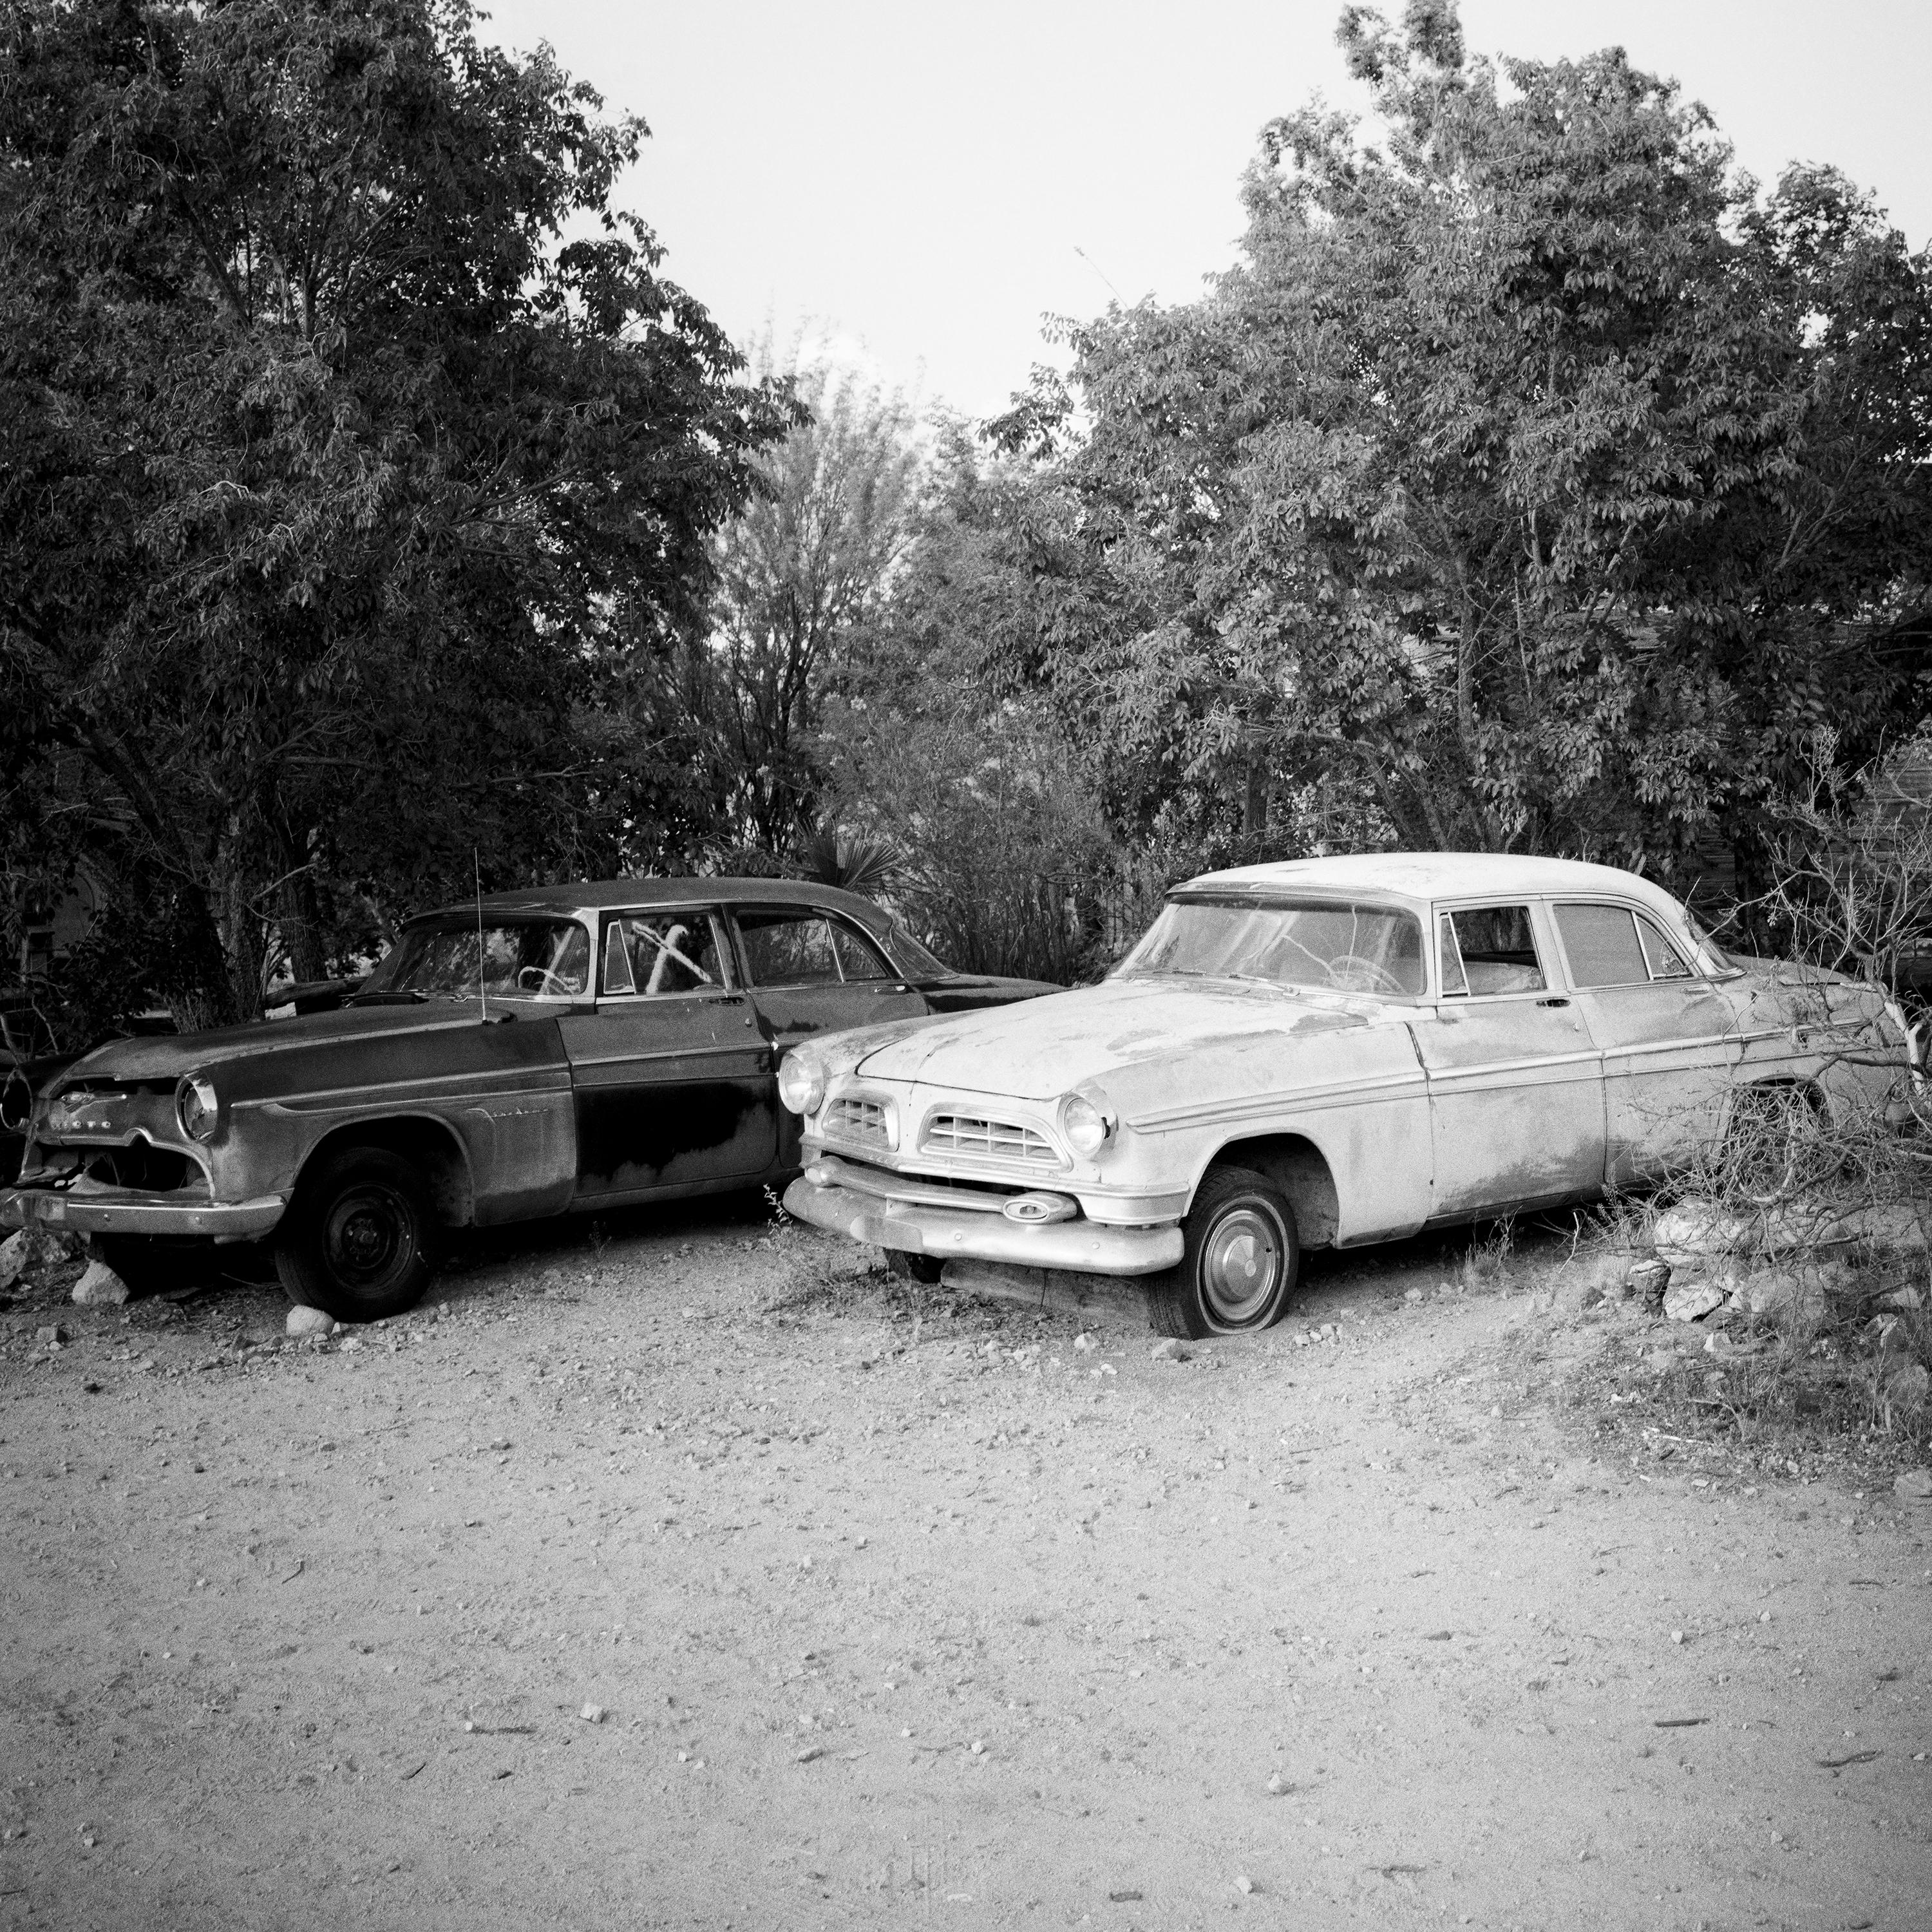 Abandoned Cars, junkyard, California, USA, black and white landscape photography For Sale 3